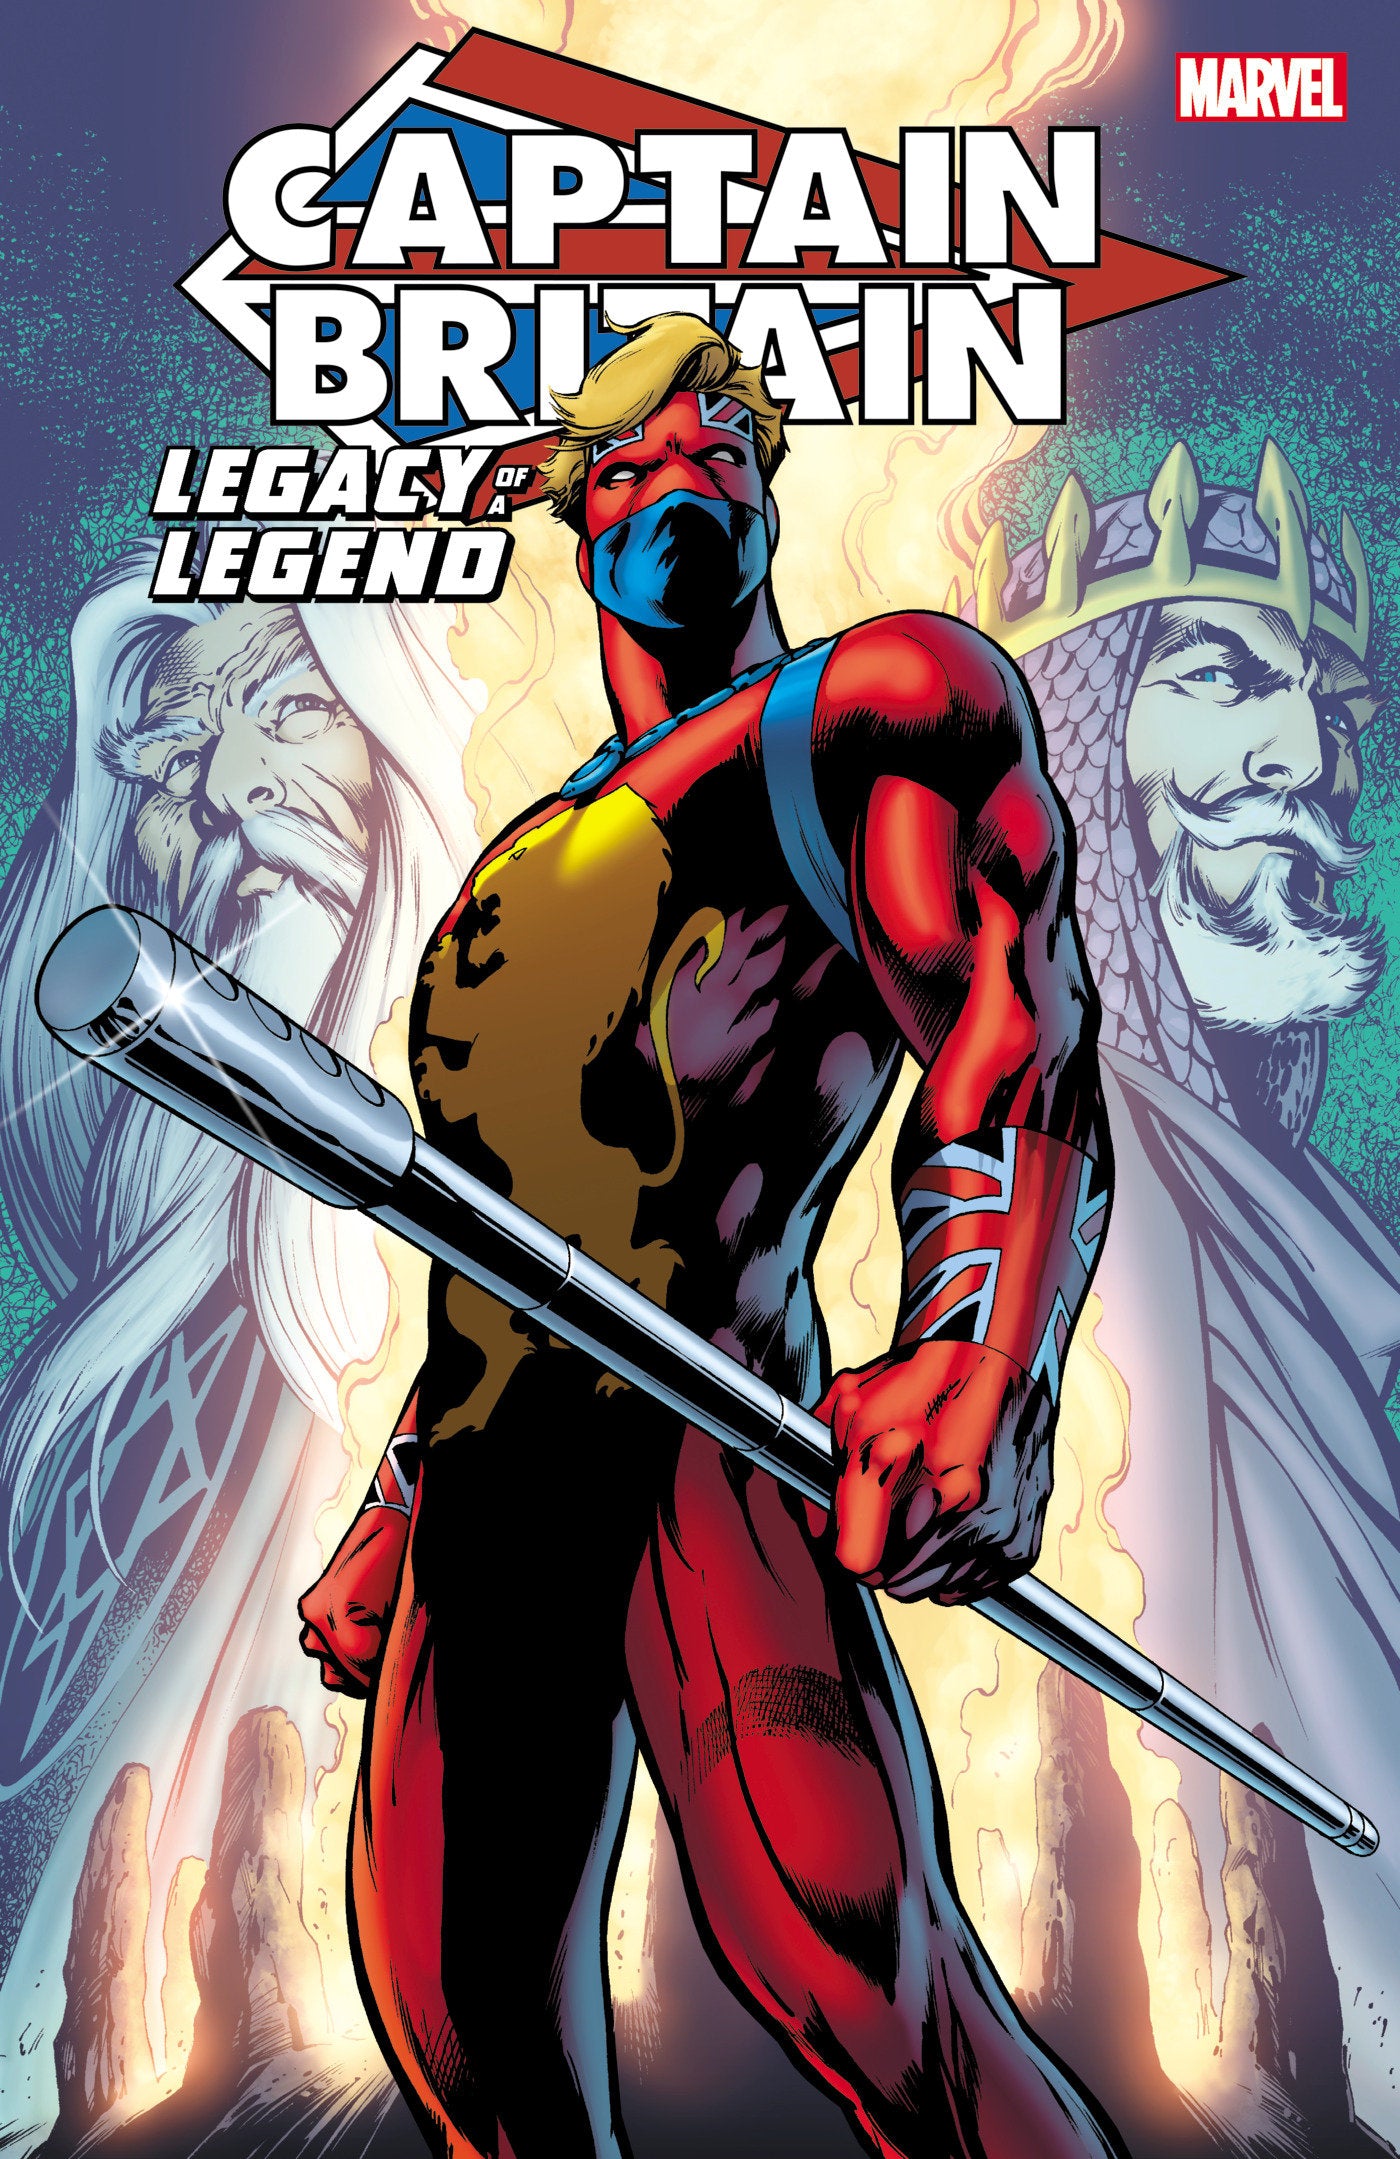 CAPTAIN BRITAIN: LEGACY OF A LEGEND TRADE PAPERBACK